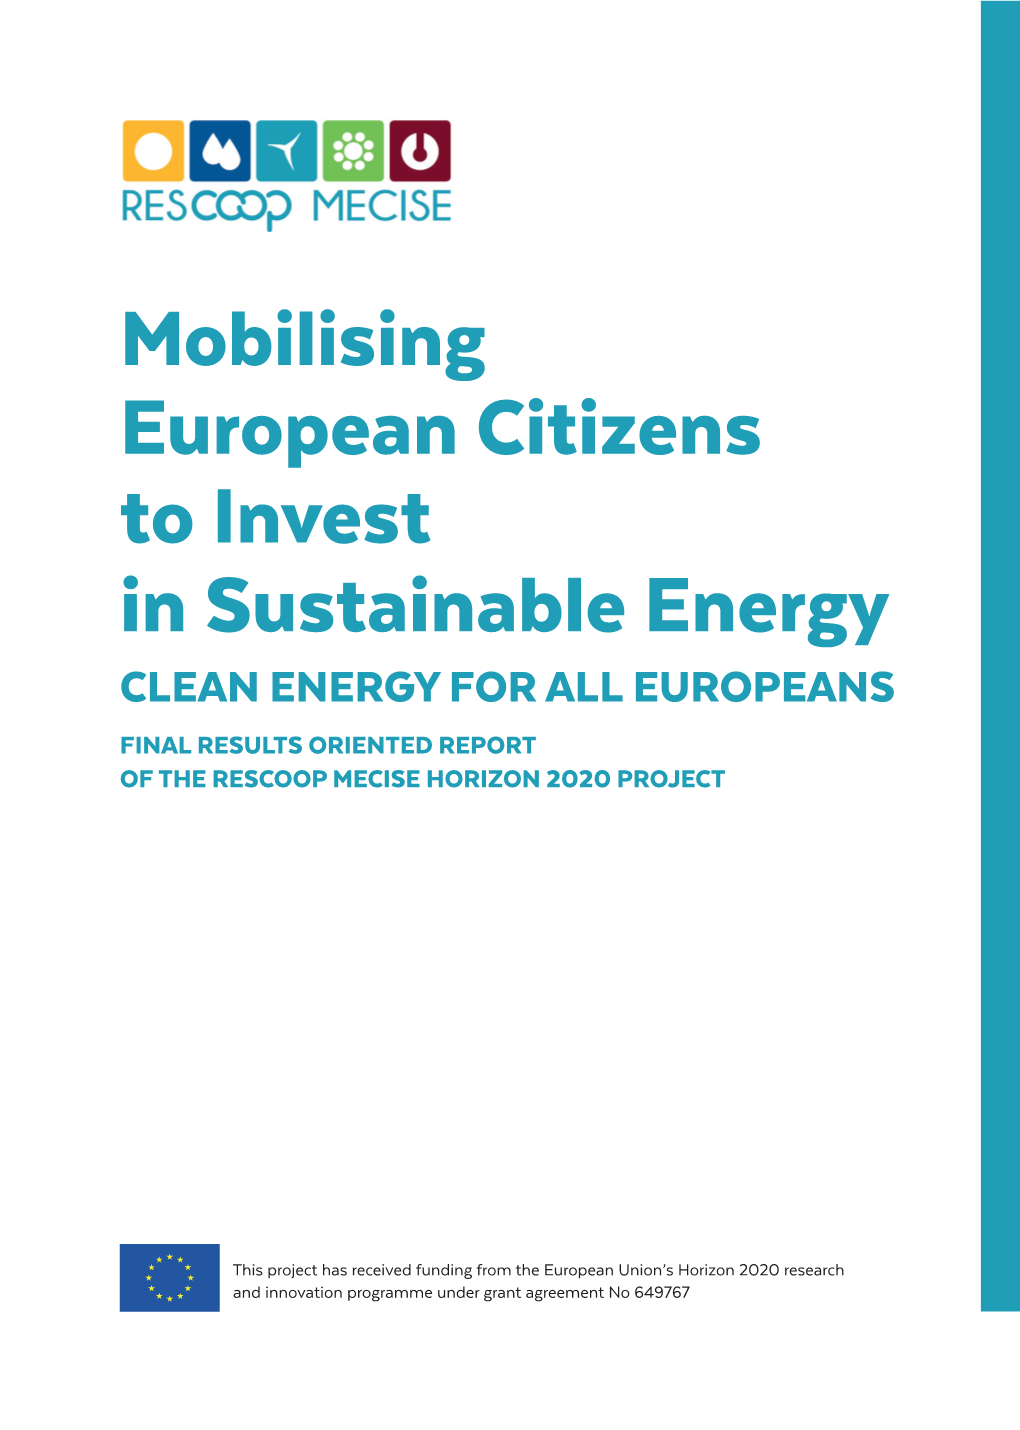 Mobilising European Citizens to Invest in Sustainable Energy CLEAN ENERGY for ALL EUROPEANS FINAL RESULTS ORIENTED REPORT of the RESCOOP MECISE HORIZON 2020 PROJECT